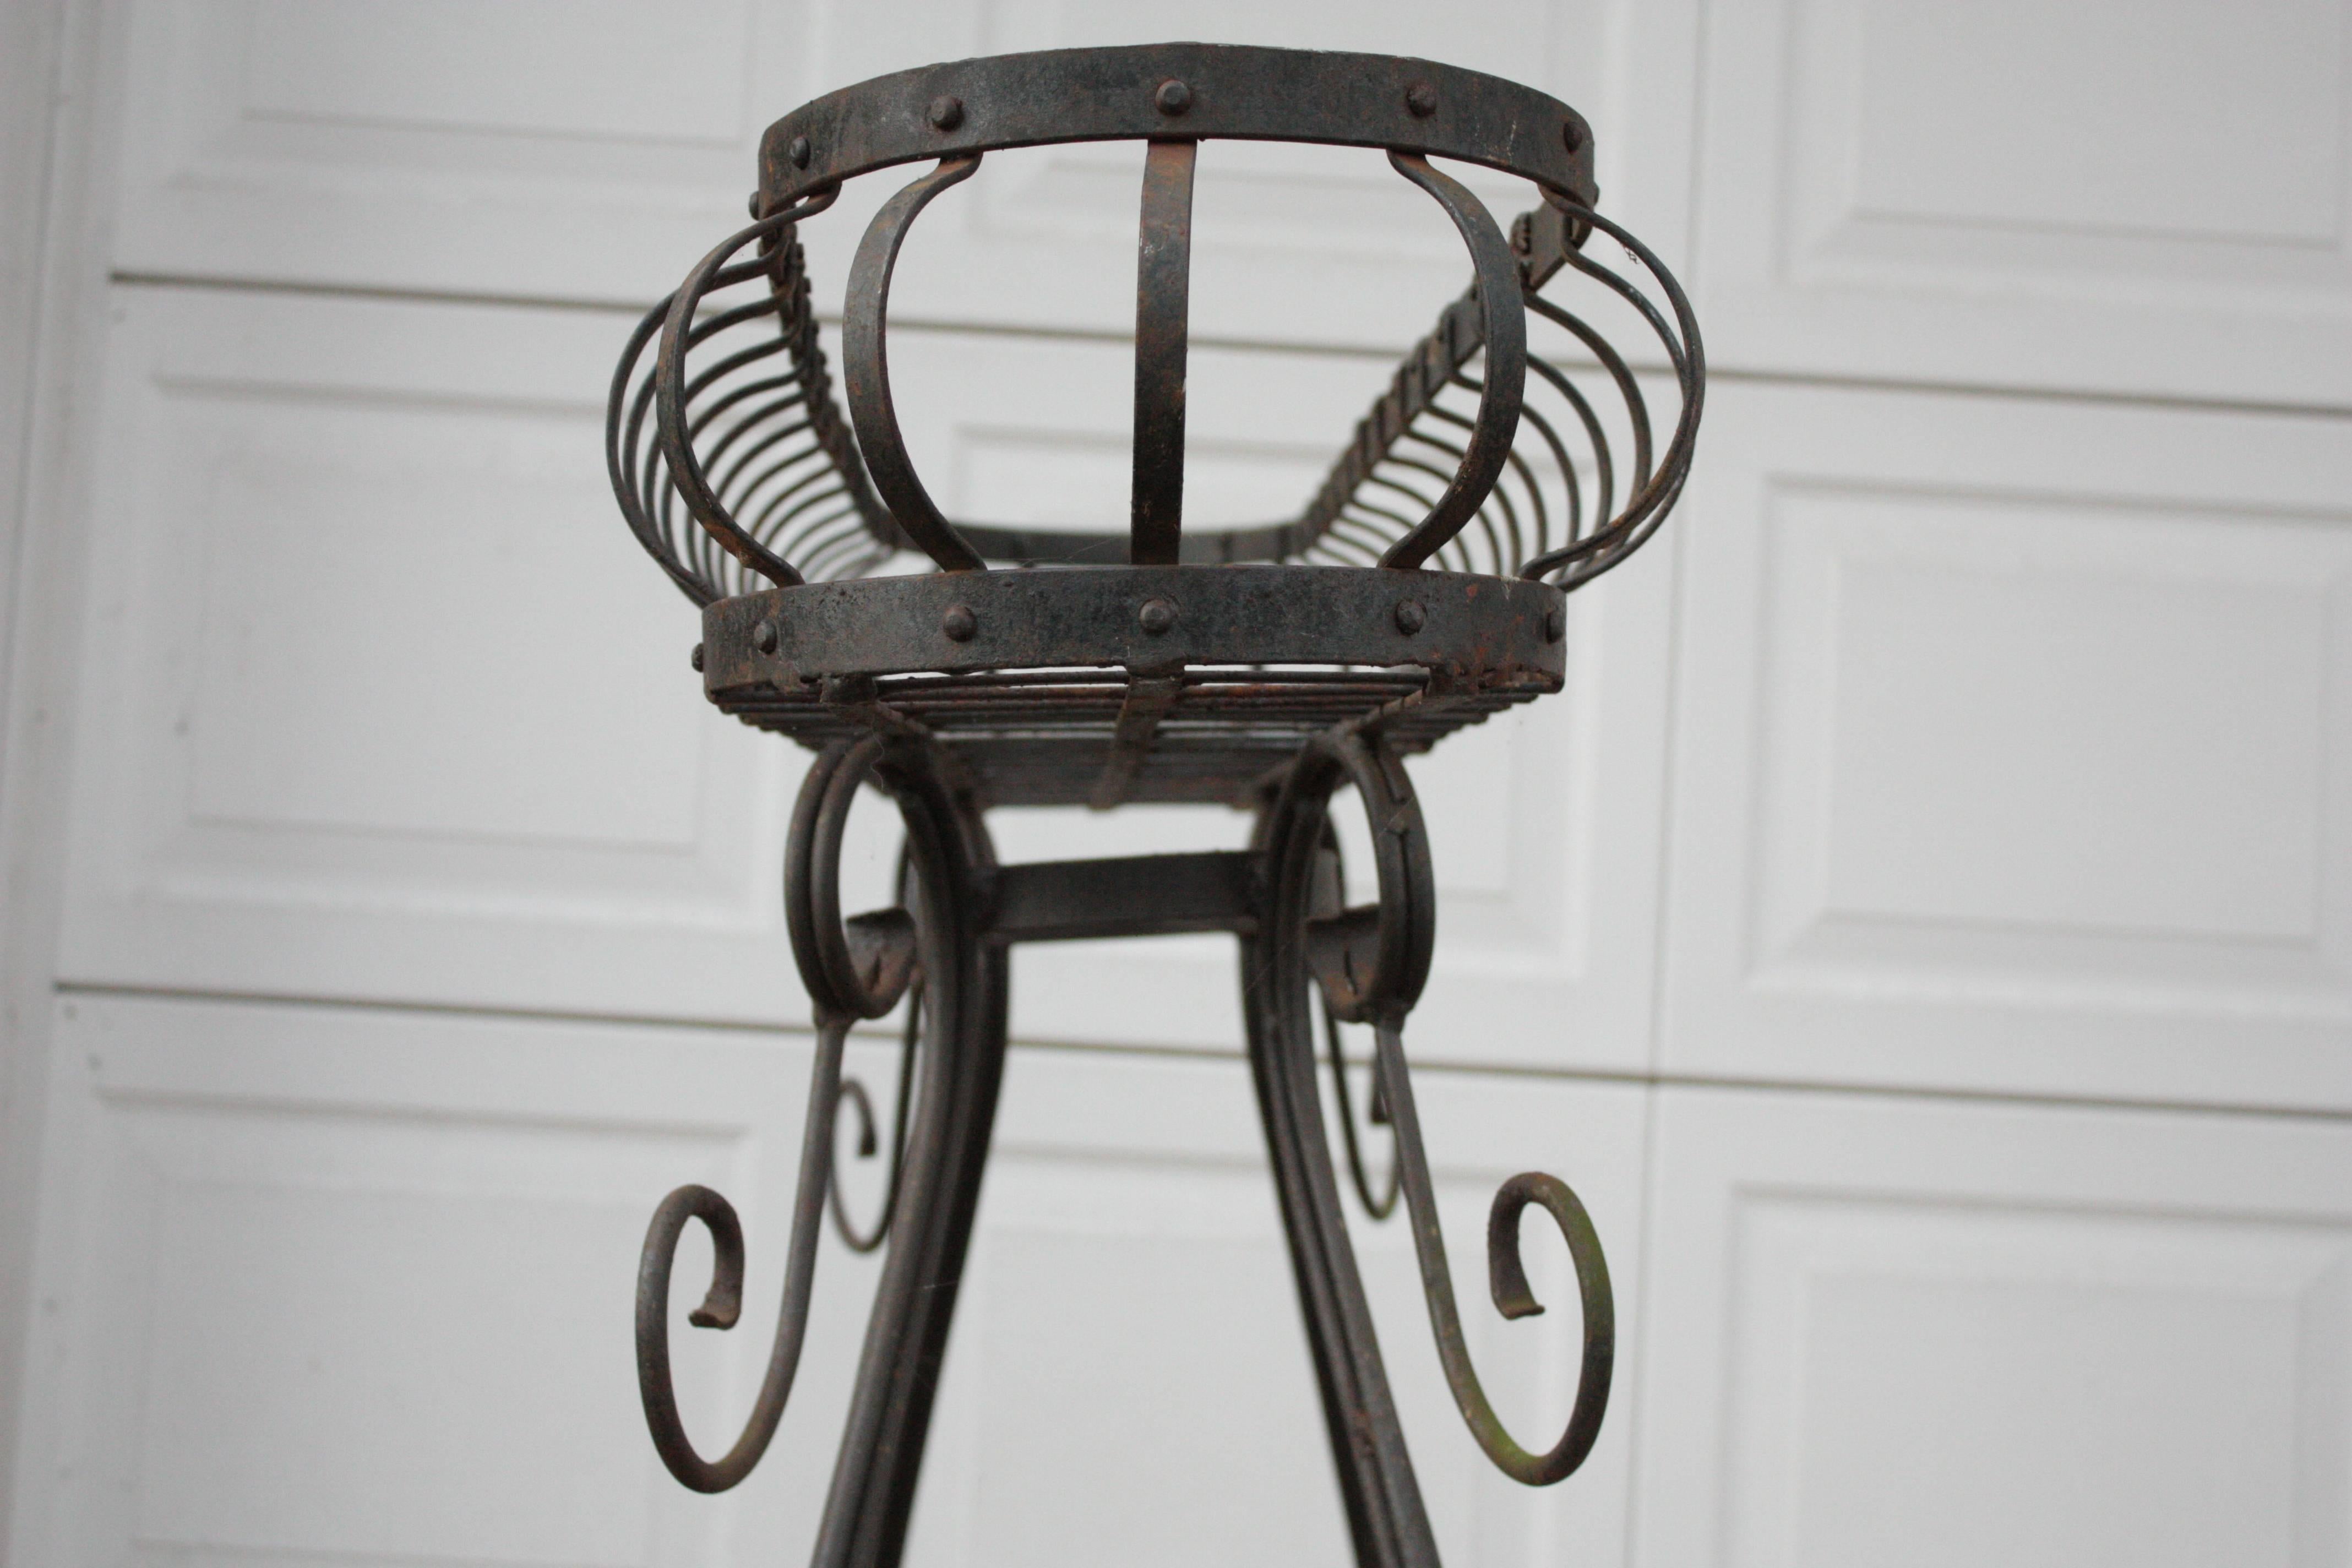 Stunning Antique elevated cast iron wire frame indoor/outdoor plater or plant stand with curled legs, feet and adornments.  Main planter is crafted in a post and lintel style.  Round iron inserts add strength, design composition, symmetry with  main